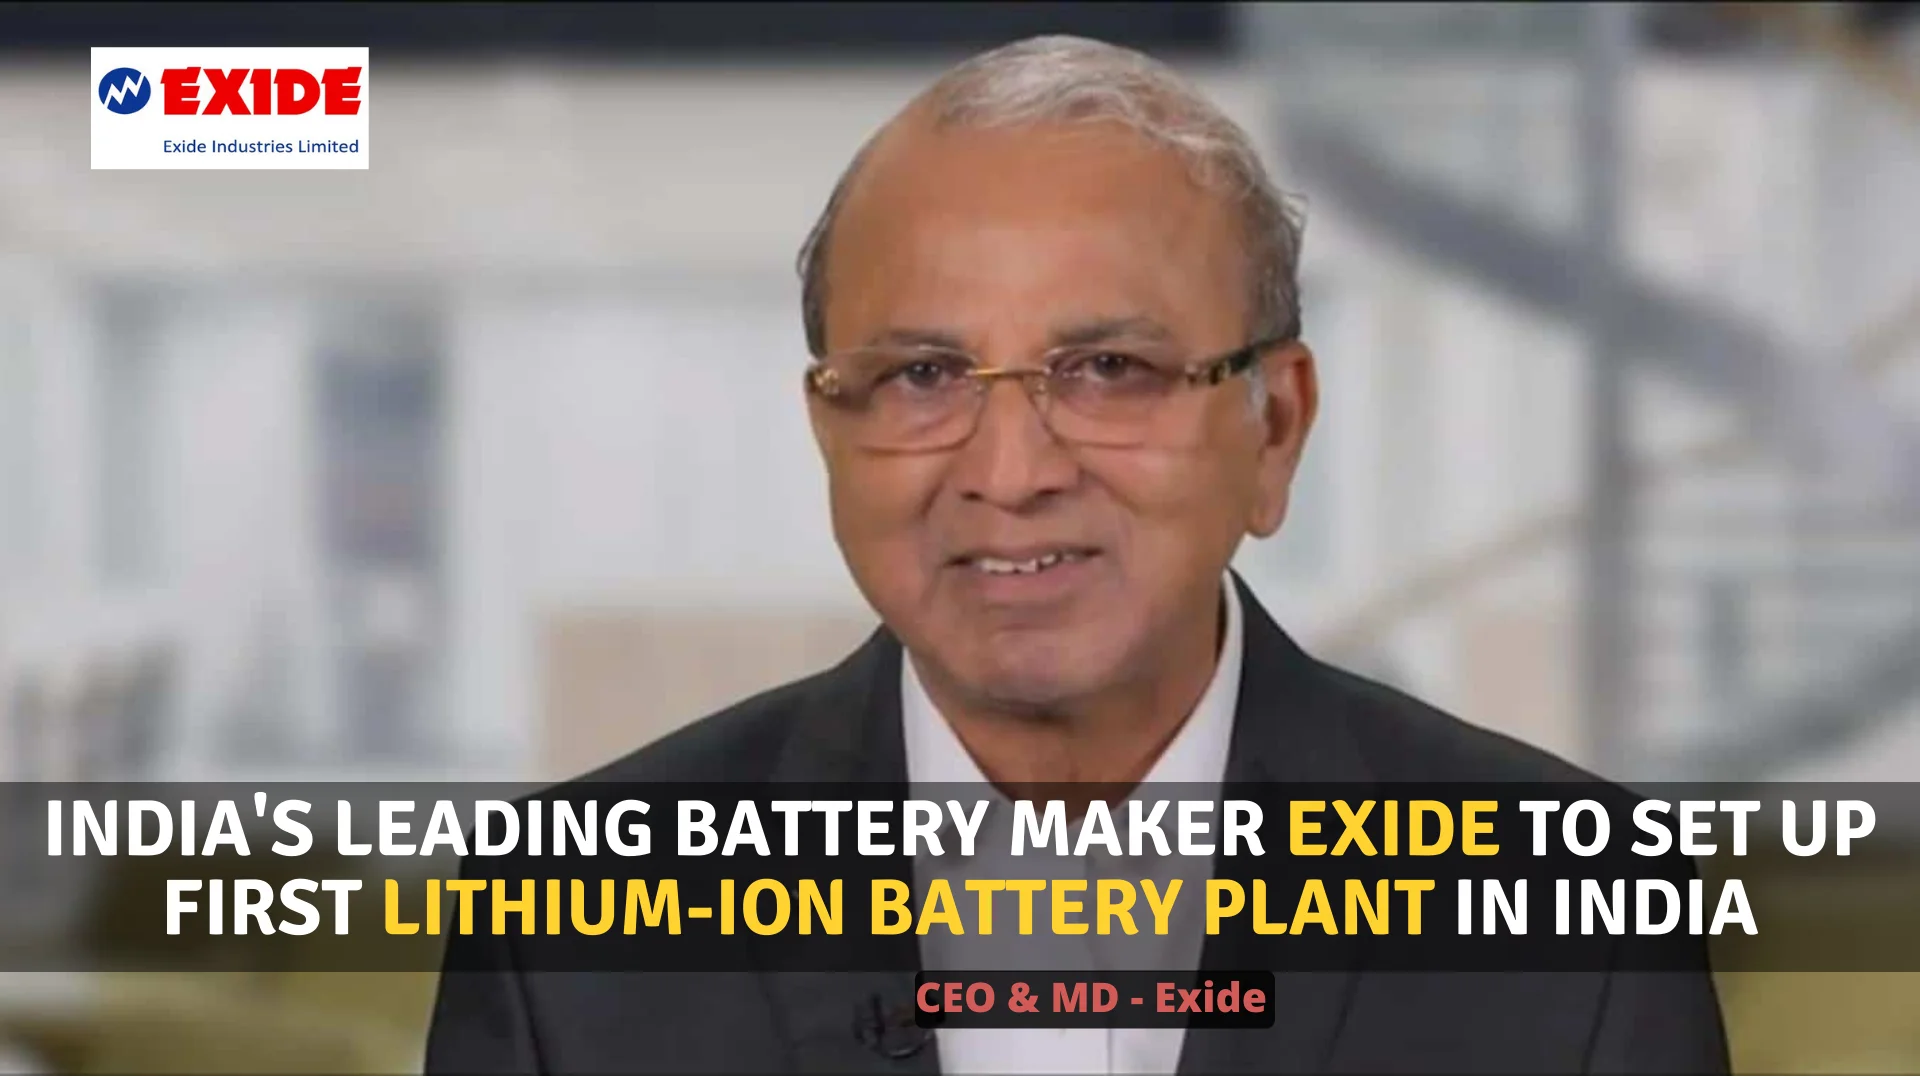 https://e-vehicleinfo.com/exide-industries-to-set-up-first-lithium-ion-battery-plant-in-india/